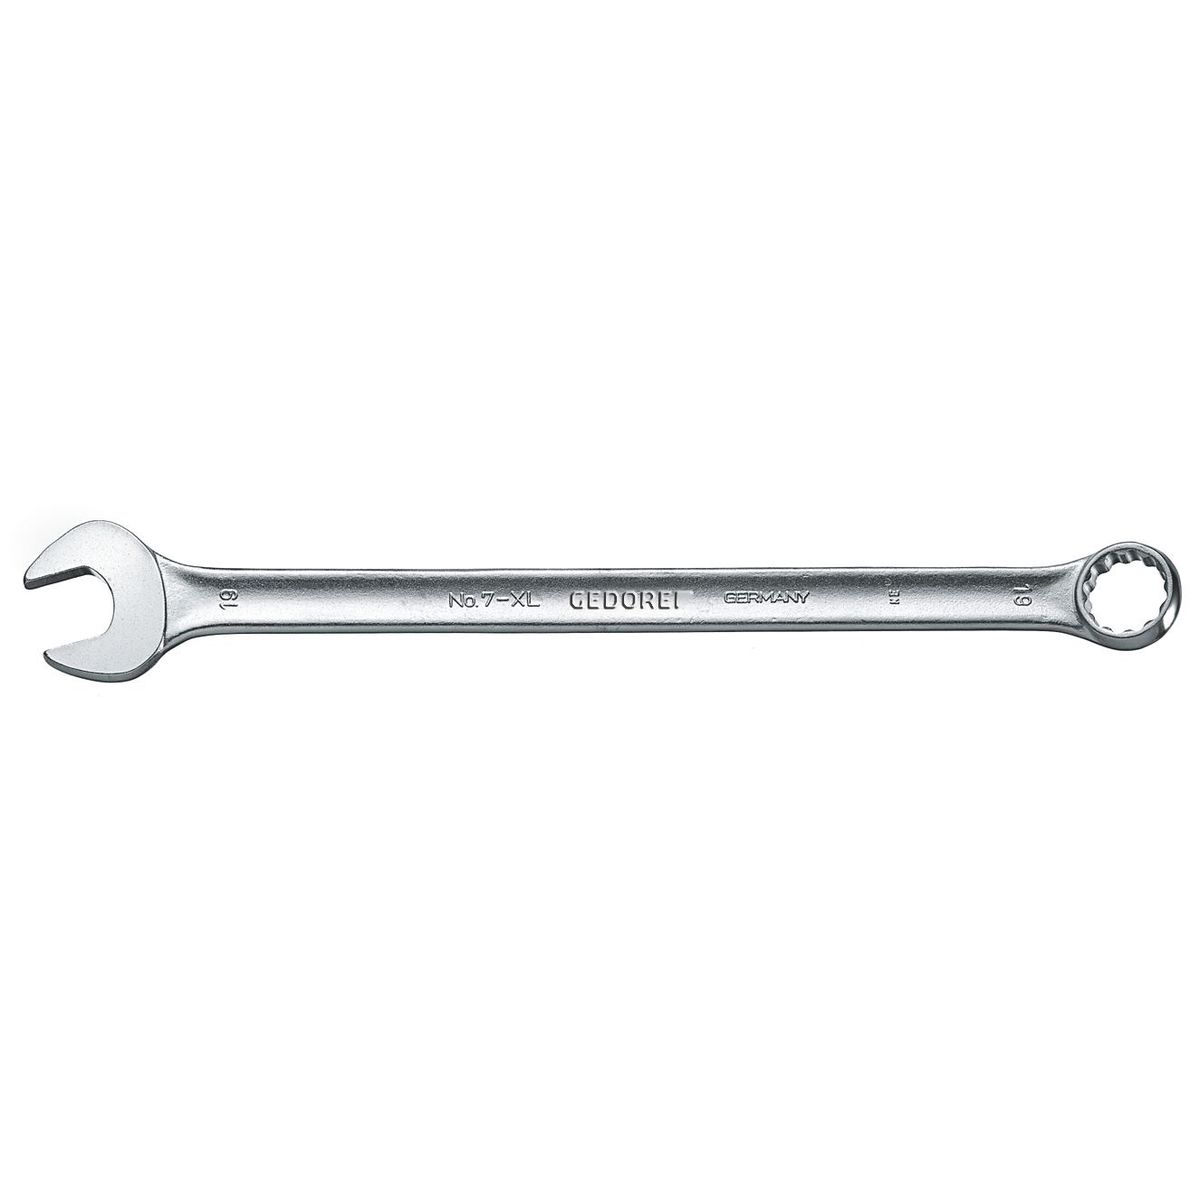 Combination spanner, extra long 21mm No.7 XL 21 Gedore